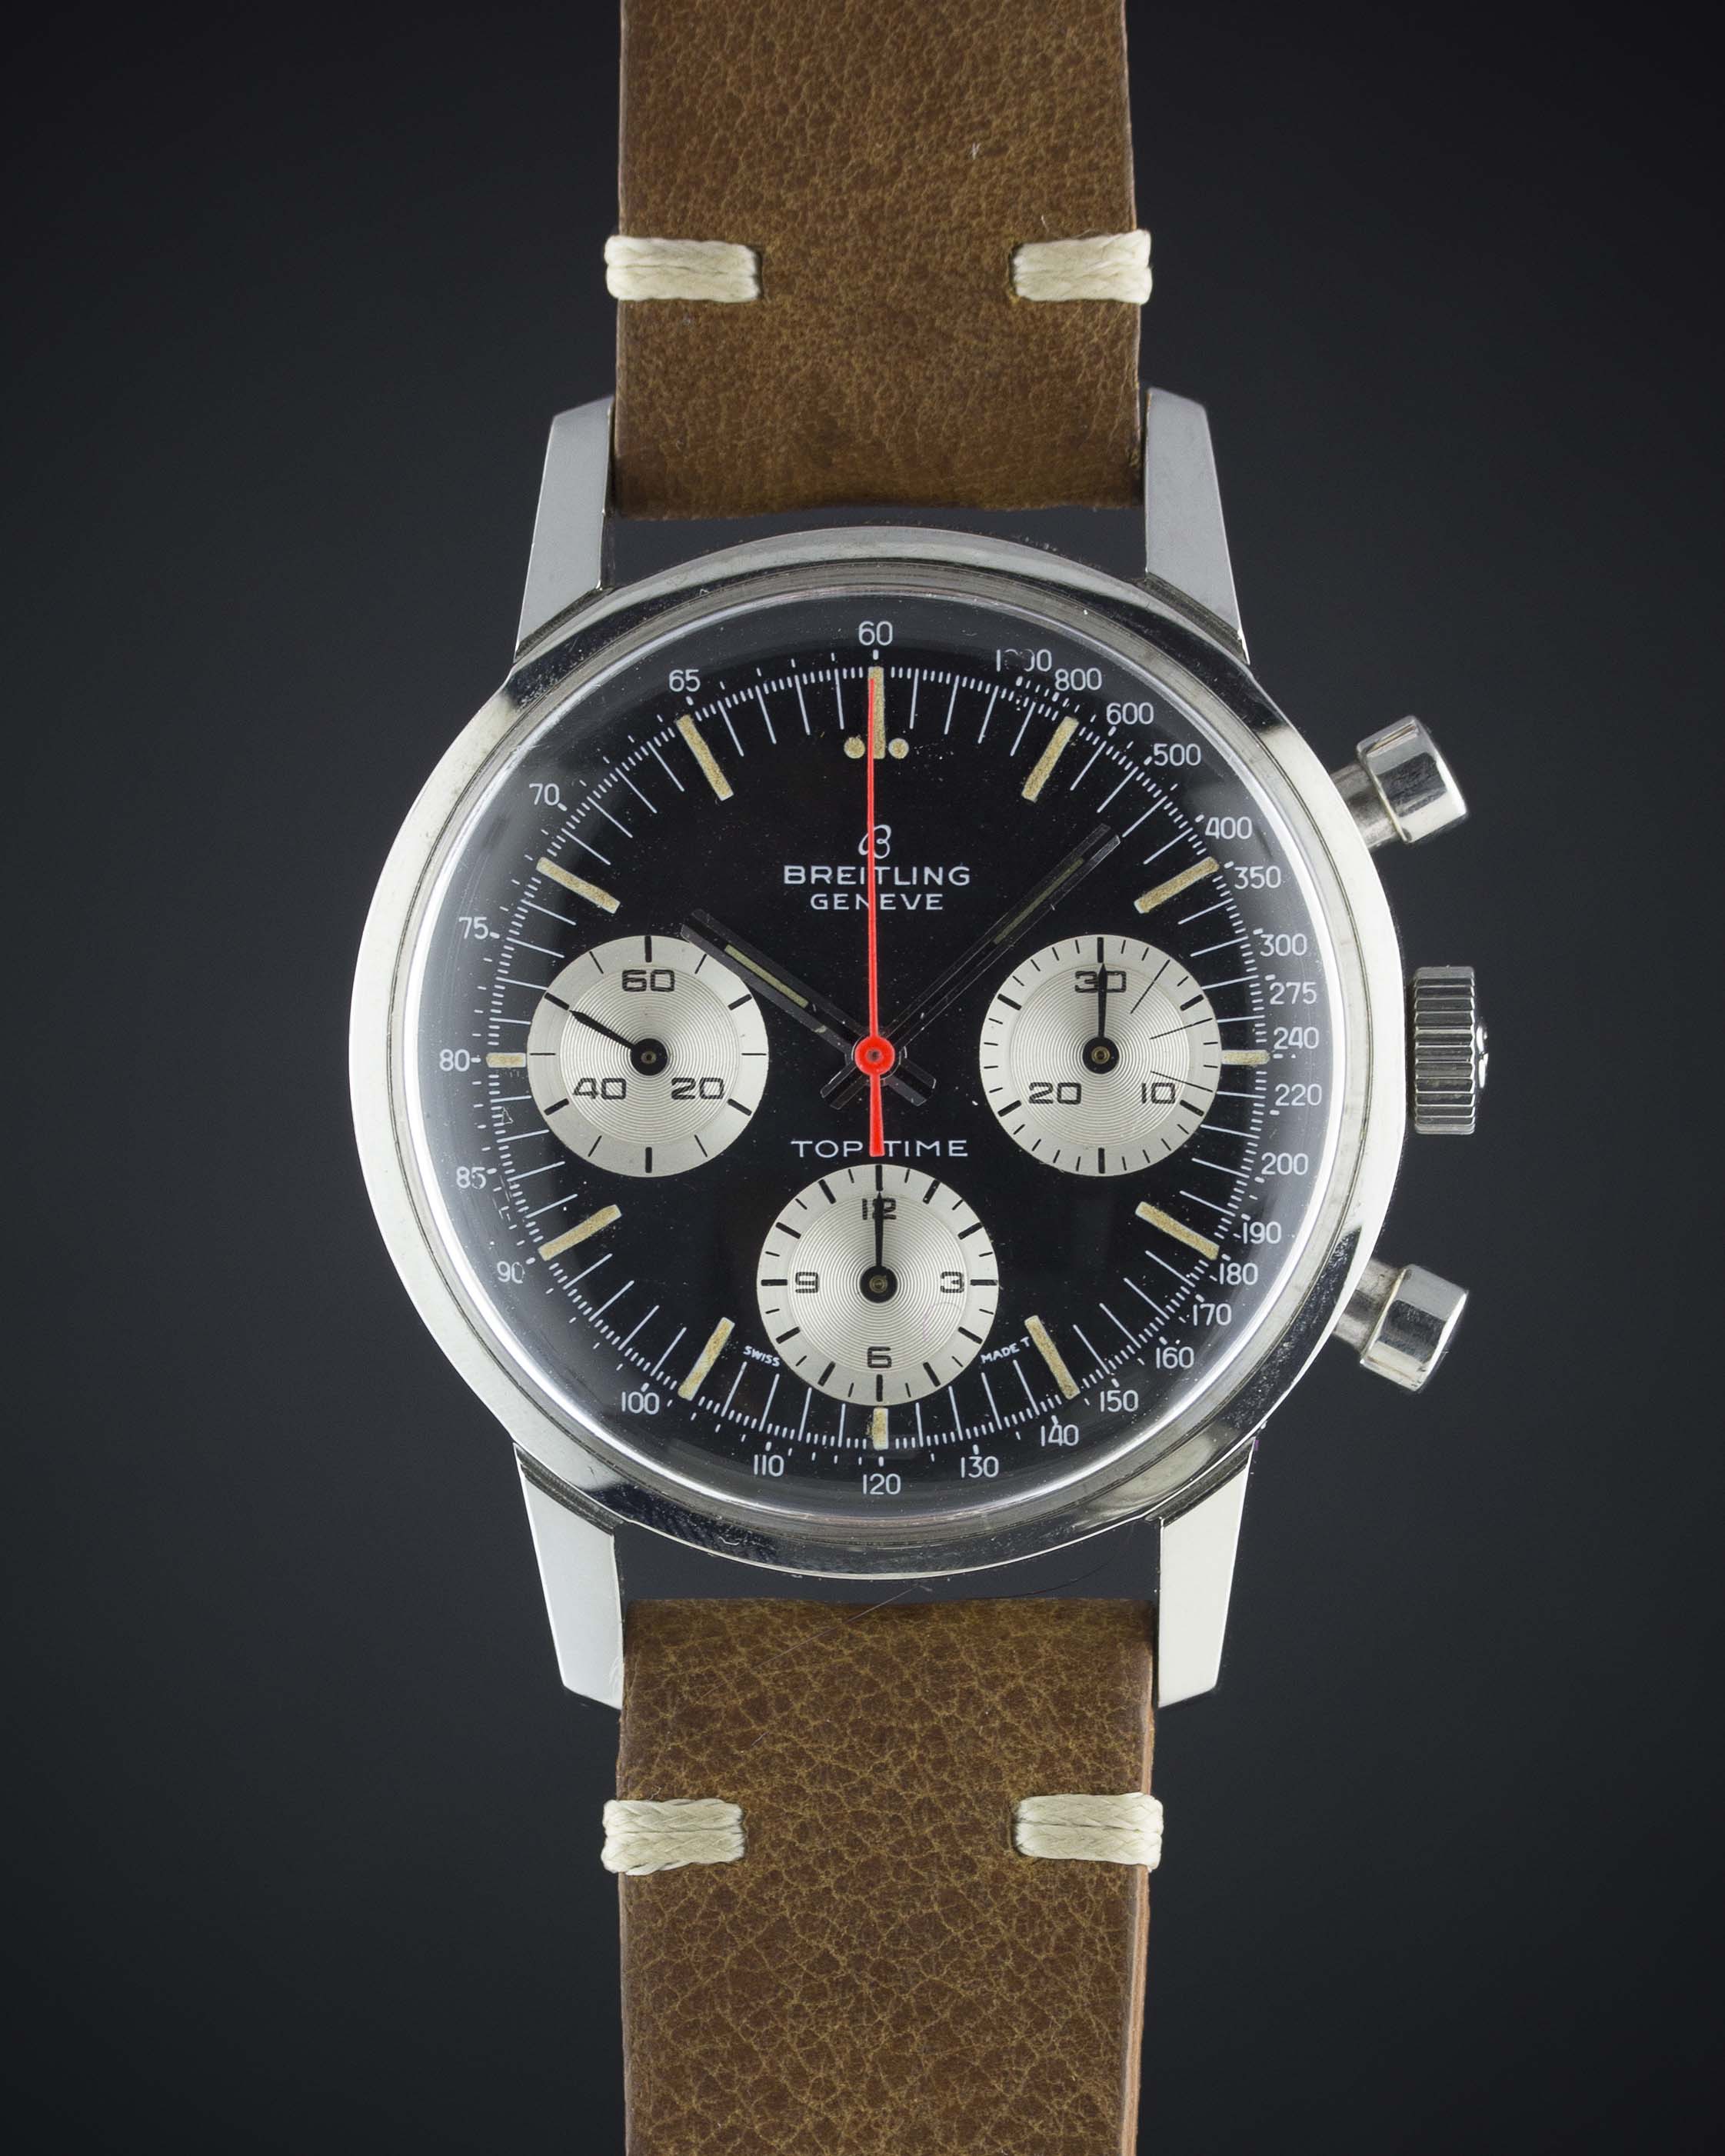 A RARE GENTLEMAN'S STAINLESS STEEL BREITLING TOP TIME CHRONOGRAPH WRIST WATCH CIRCA 1969, REF. 810 - Image 2 of 11